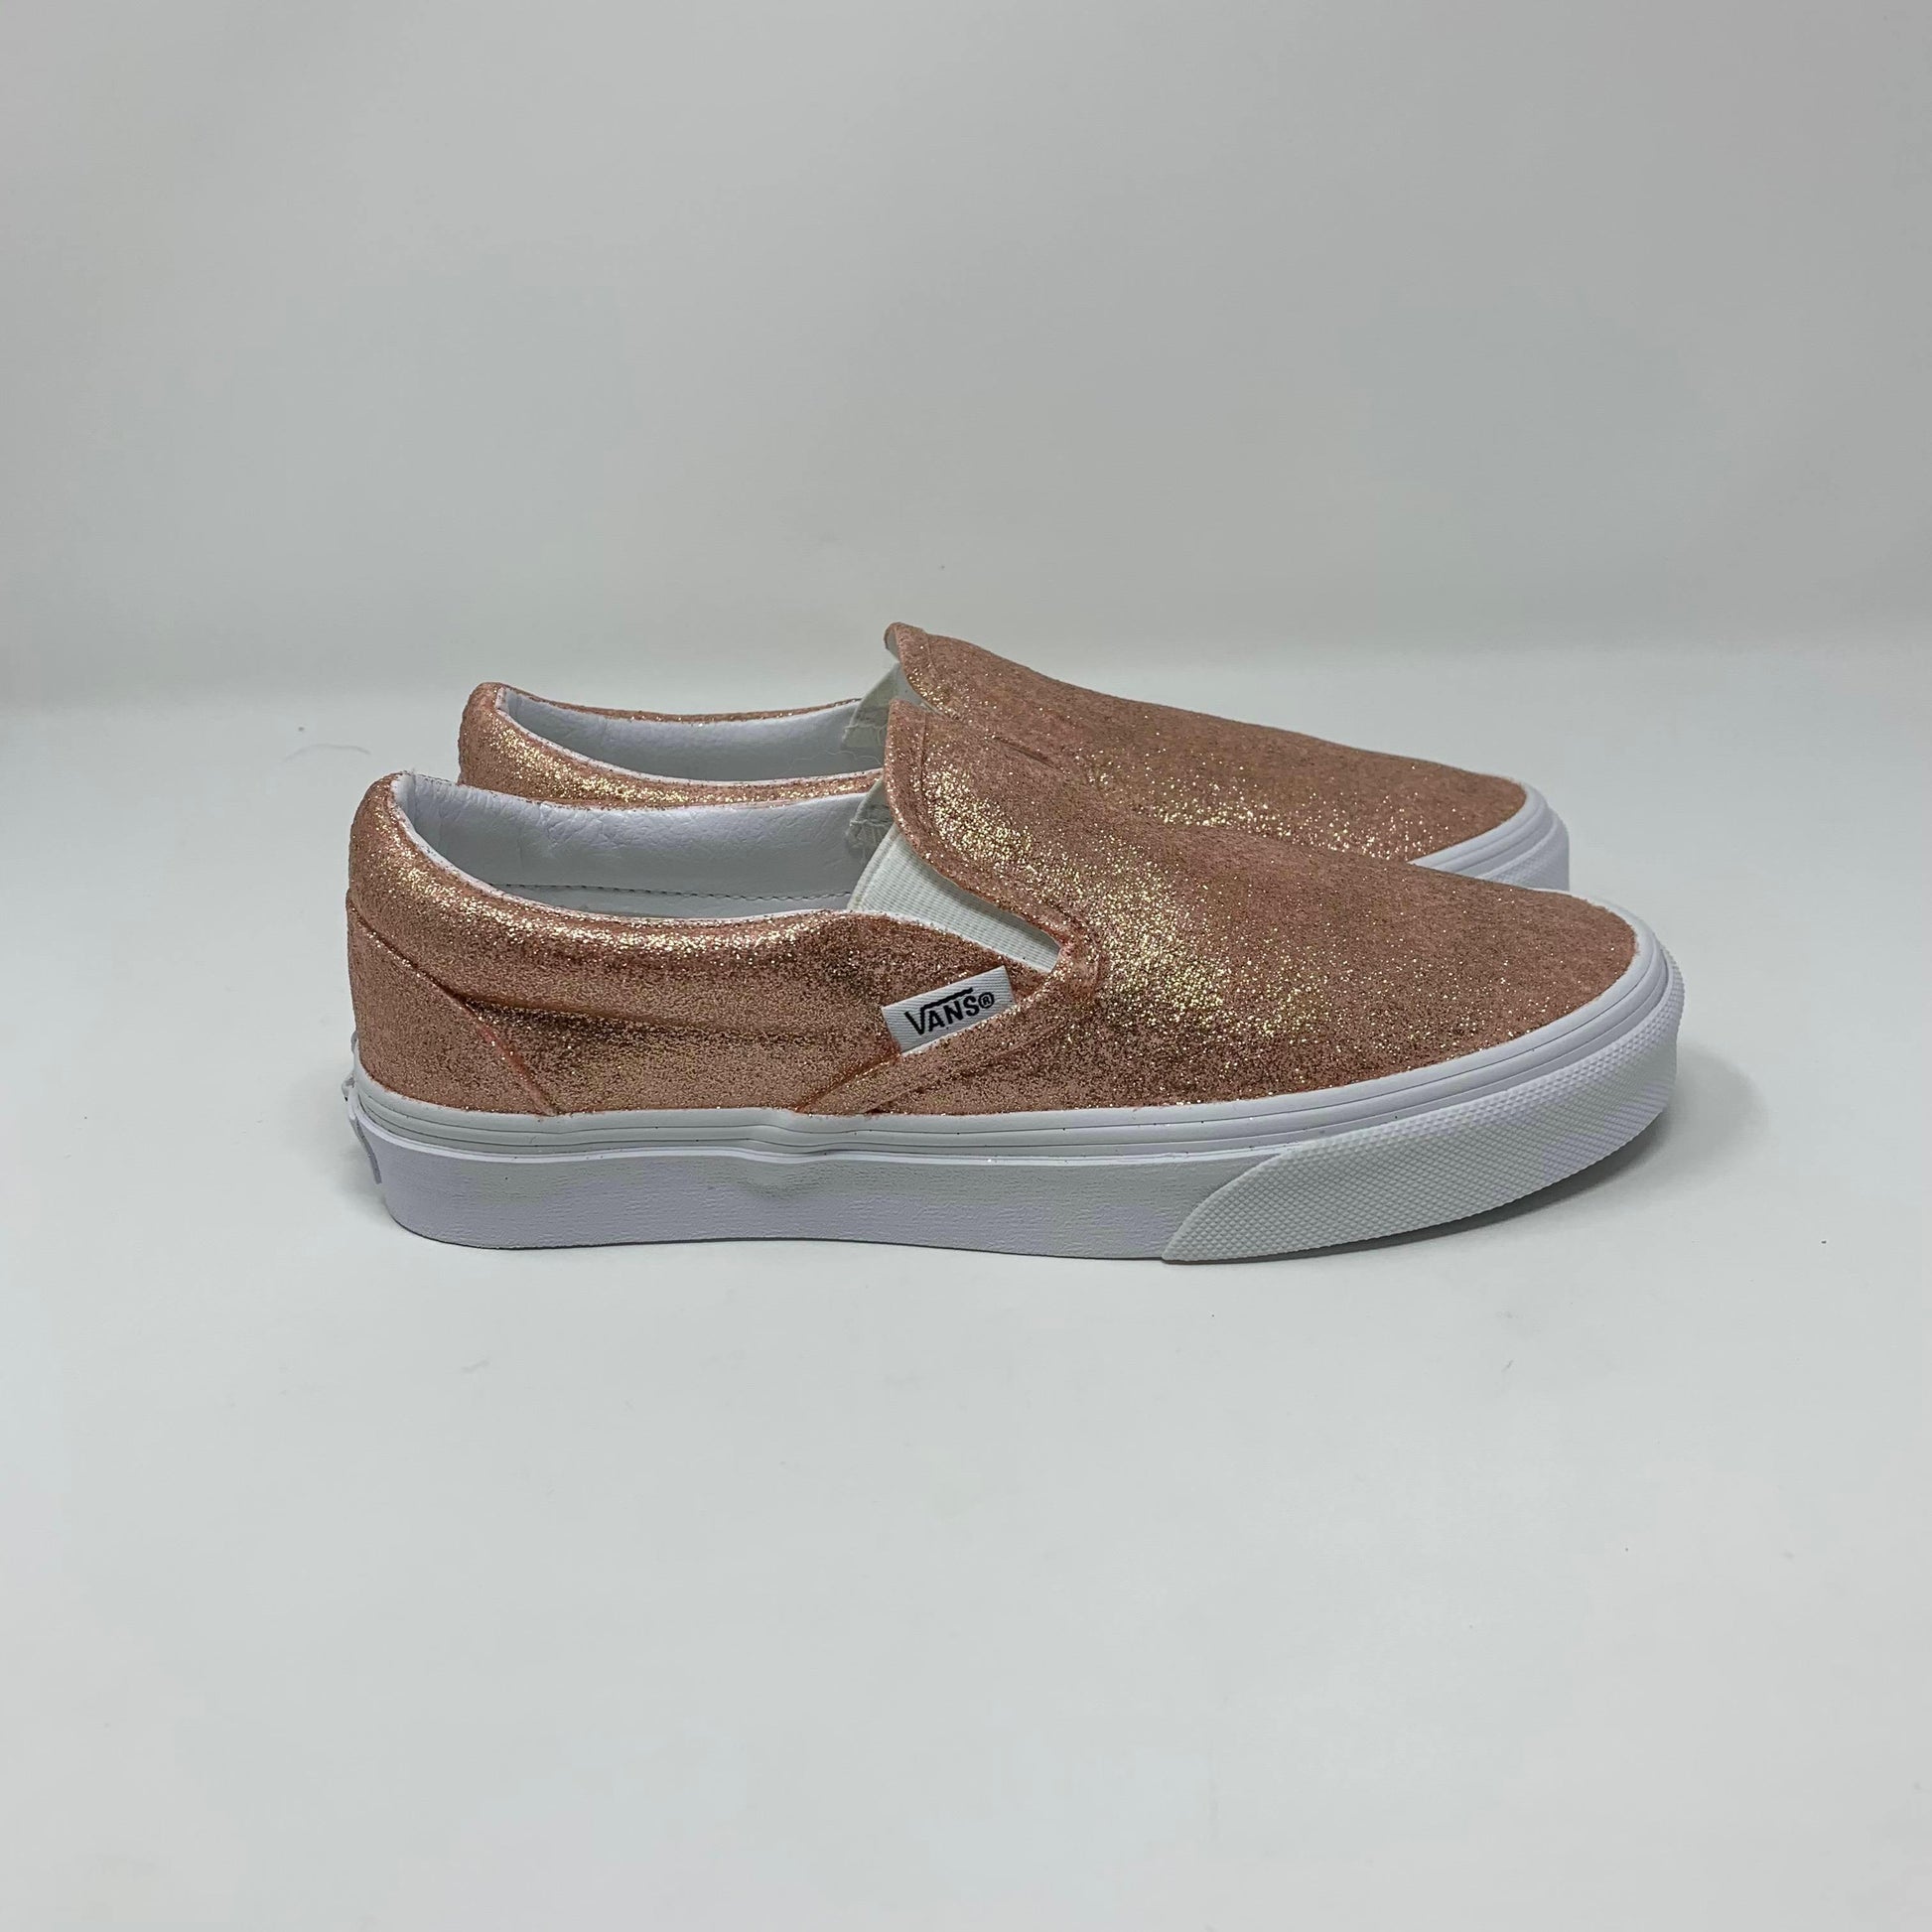 Rose Gold Glitter Shoes - ButterMakesMeHappy